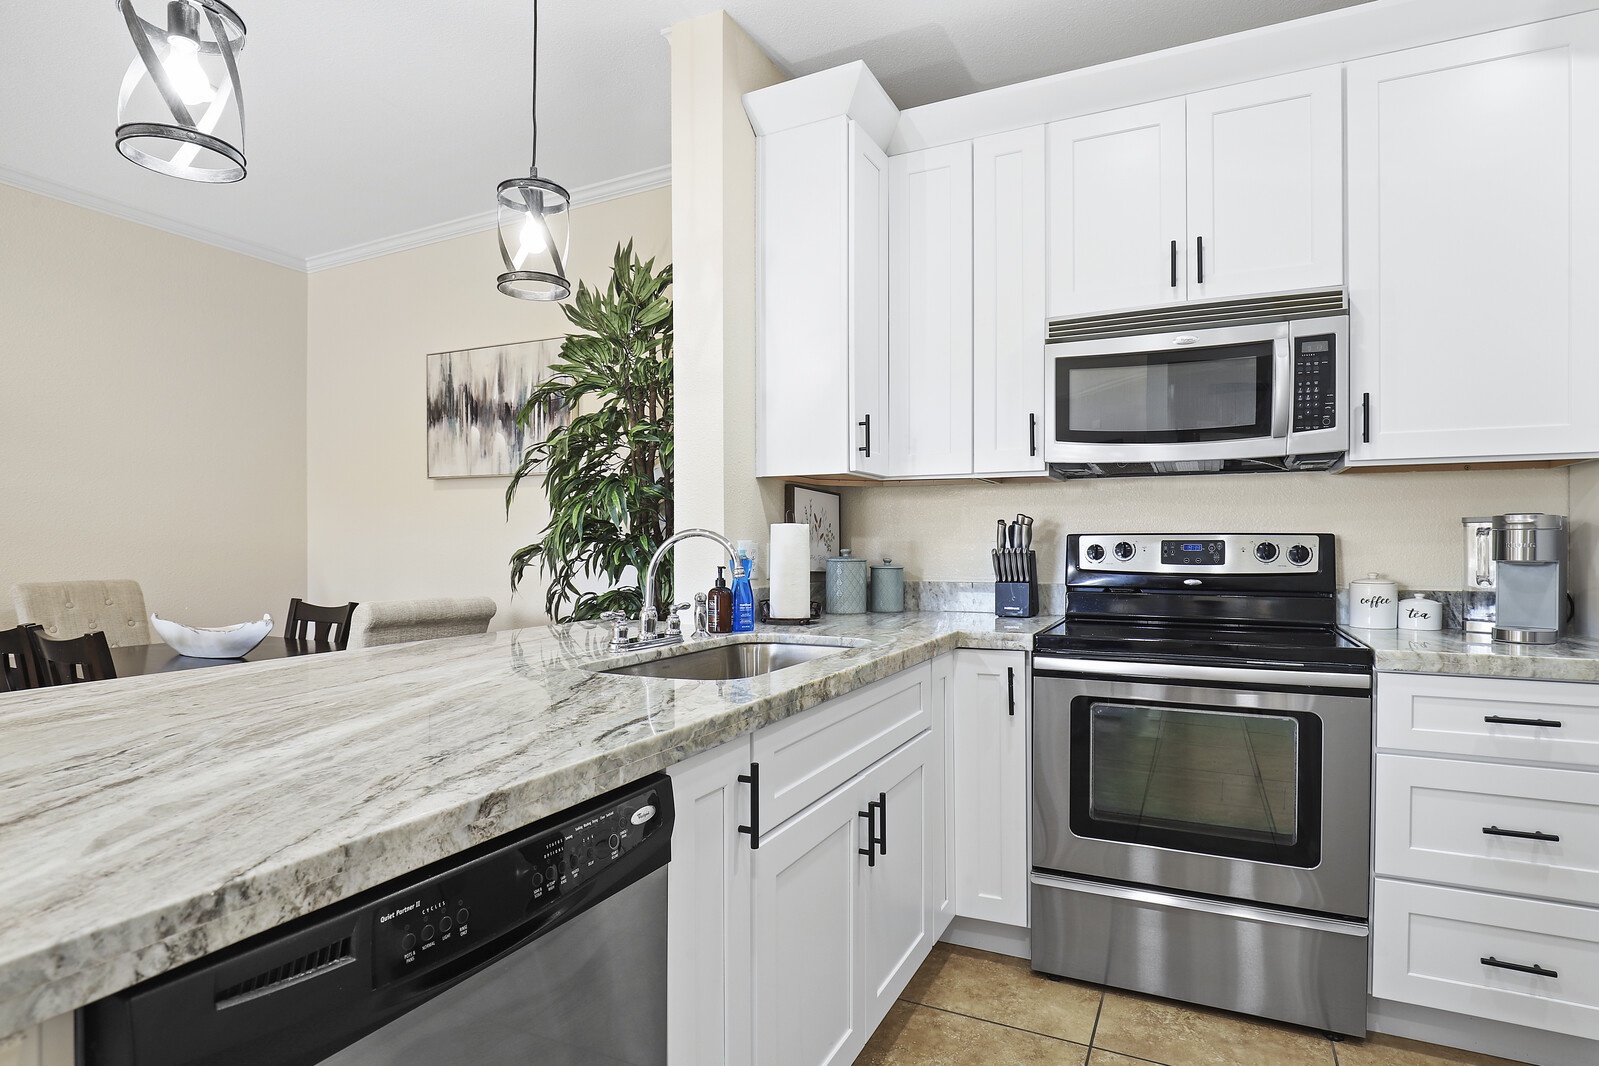 Kitchen offers modern stainless steel appliances including: dishwasher, fridge, stove top, coffee maker, pots and pans, plates, and utensils.